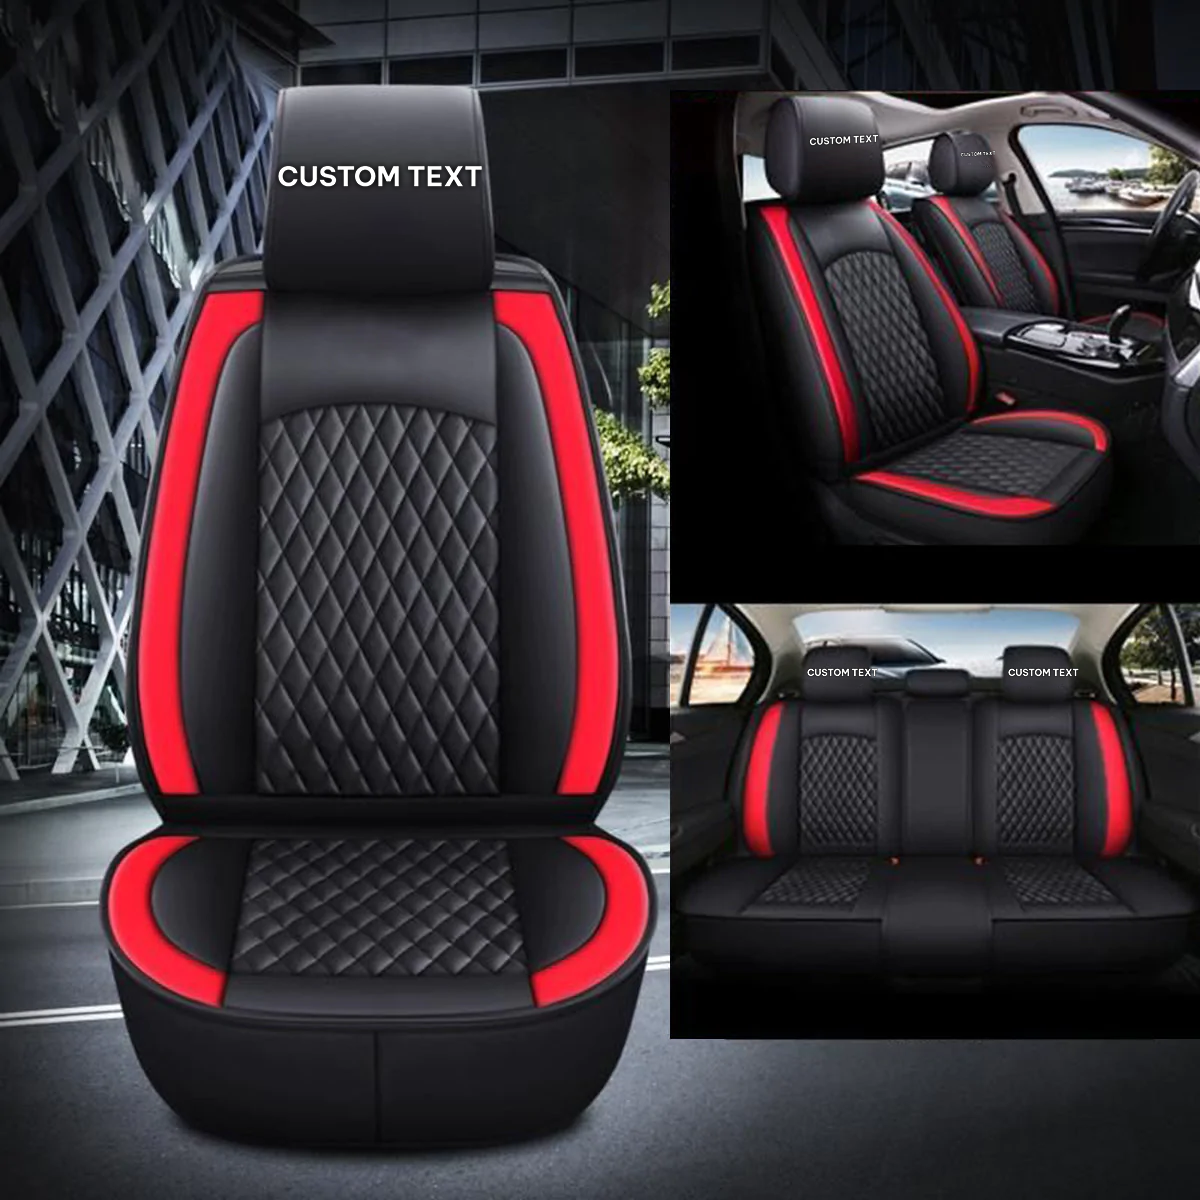 Custom Text For Seat Covers 5 Seats Full Set, Custom Fit For Your Cars, Leatherette Automotive Seat Cushion Protector Universal Fit, Vehicle Auto Interior Decor RL13988